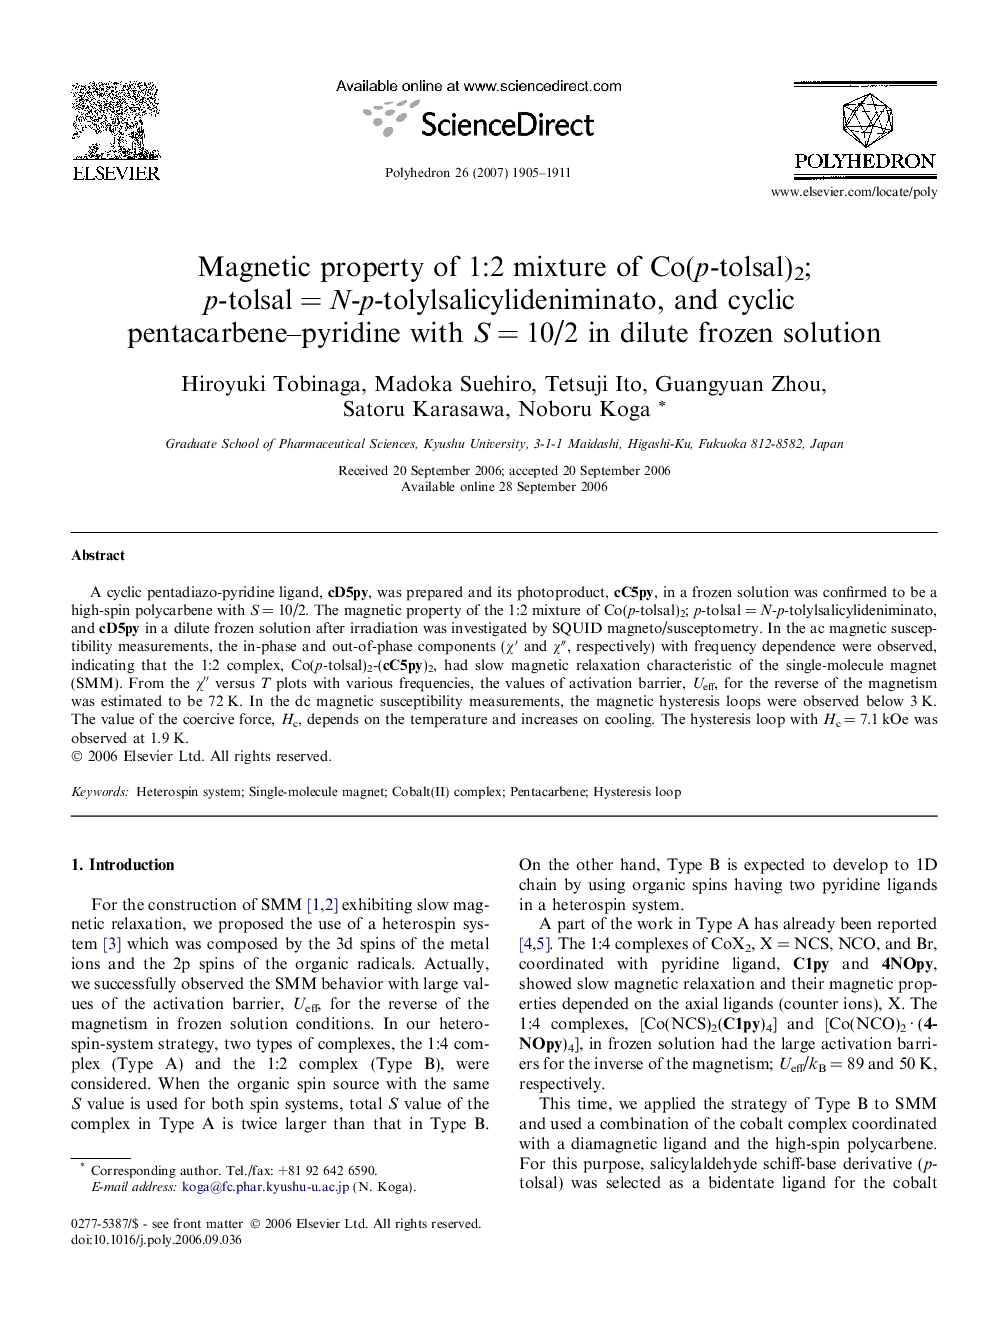 Magnetic property of 1:2 mixture of Co(p-tolsal)2; p-tolsal = N-p-tolylsalicylideniminato, and cyclic pentacarbene–pyridine with S = 10/2 in dilute frozen solution